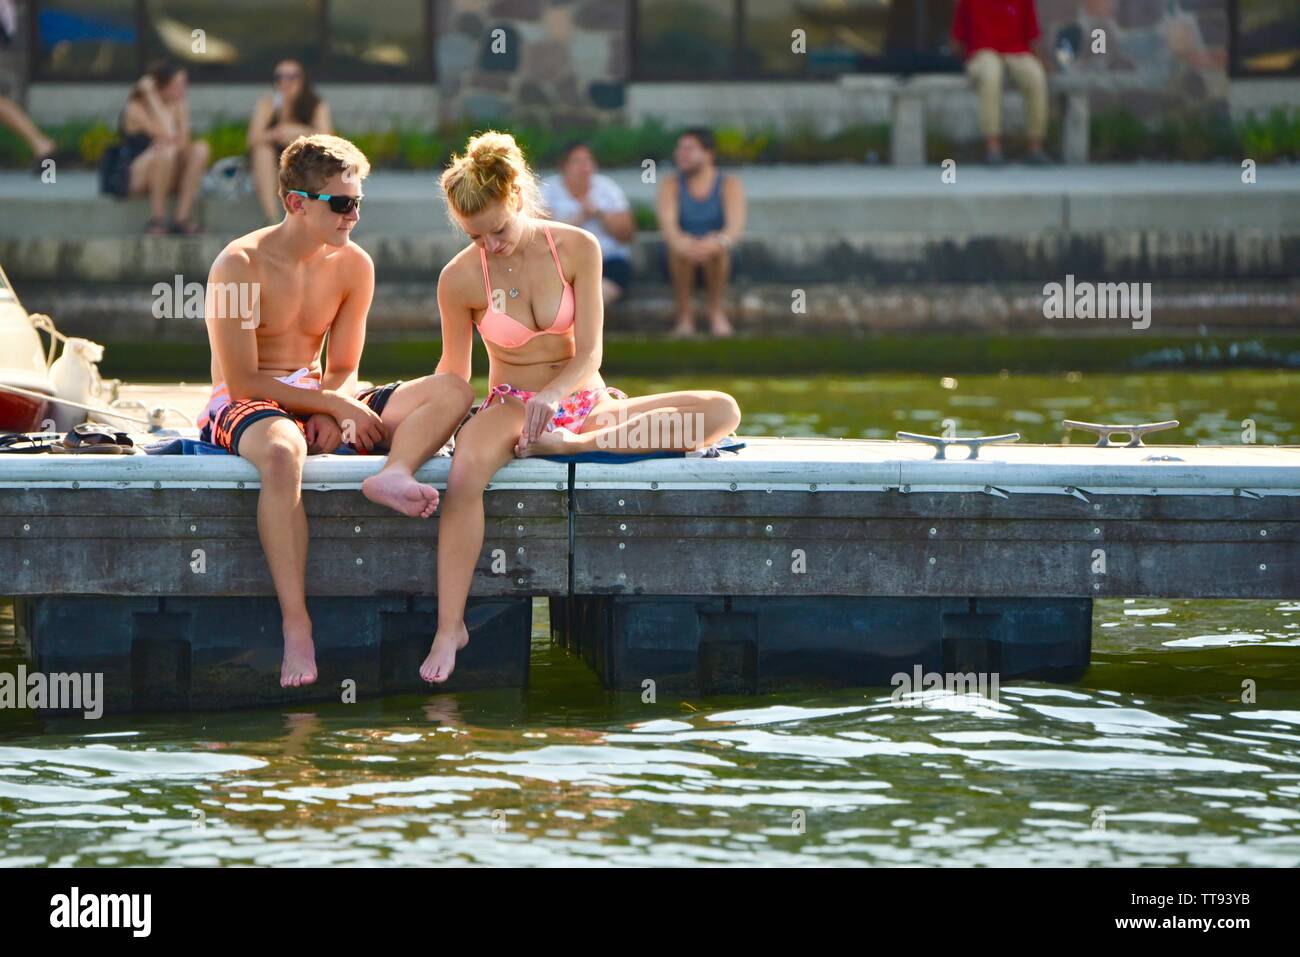 Young college students, male and female, in swimsuits, on dock, Lake Mendota, near University of Wisconsin Memorial Union, Madison, Wisconsin, USA Stock Photo